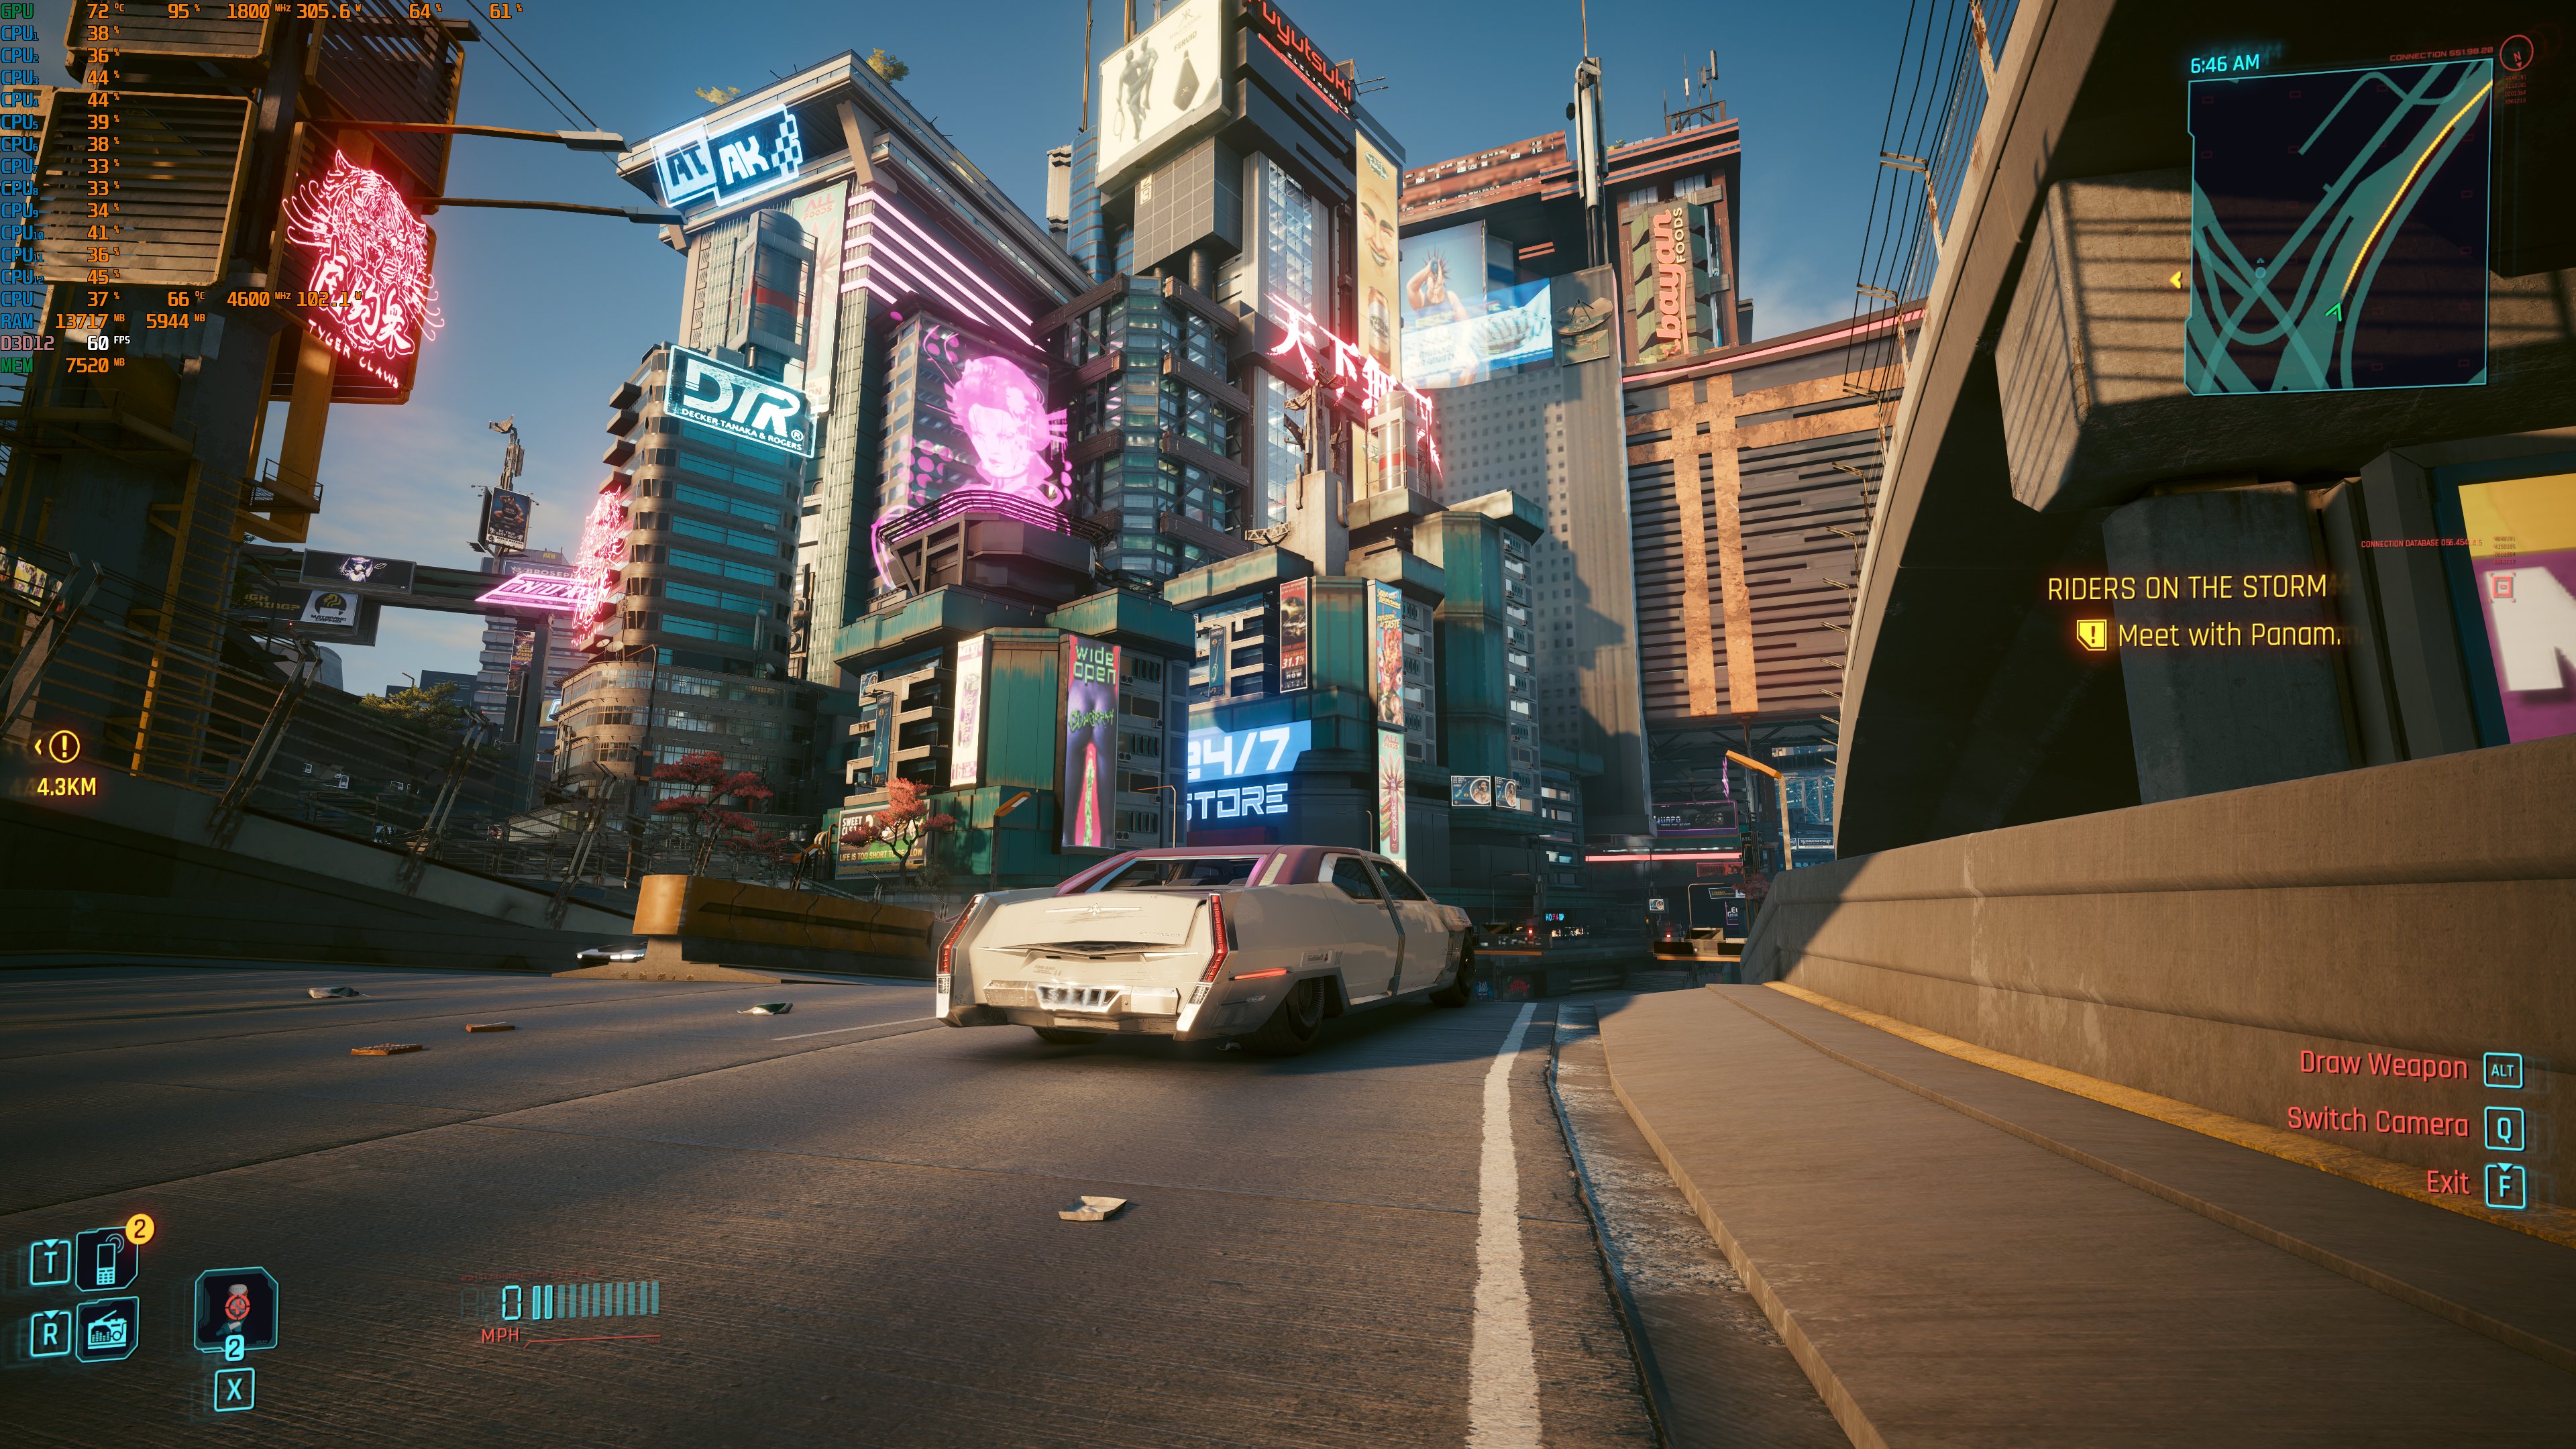 Cyberpunk 2077 To Showcase Truly Next-Gen RTX Path Tracing as part of RT:  Overdrive Mode in GDC Presentation